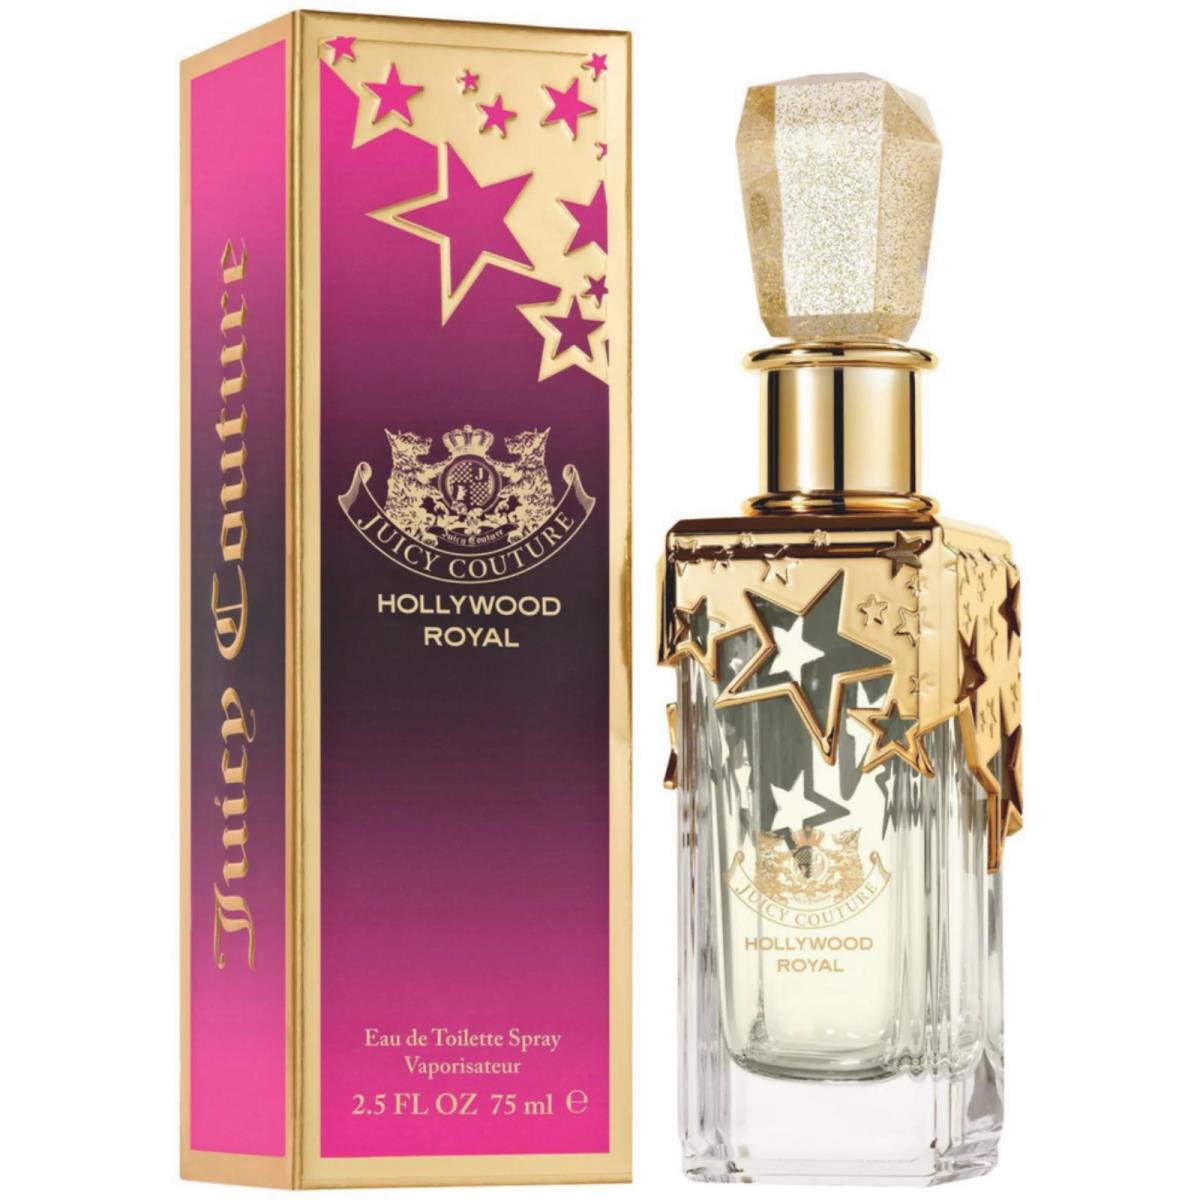 Juicy Couture Hollywood Royal Edt Spray Women 2.5 OZ